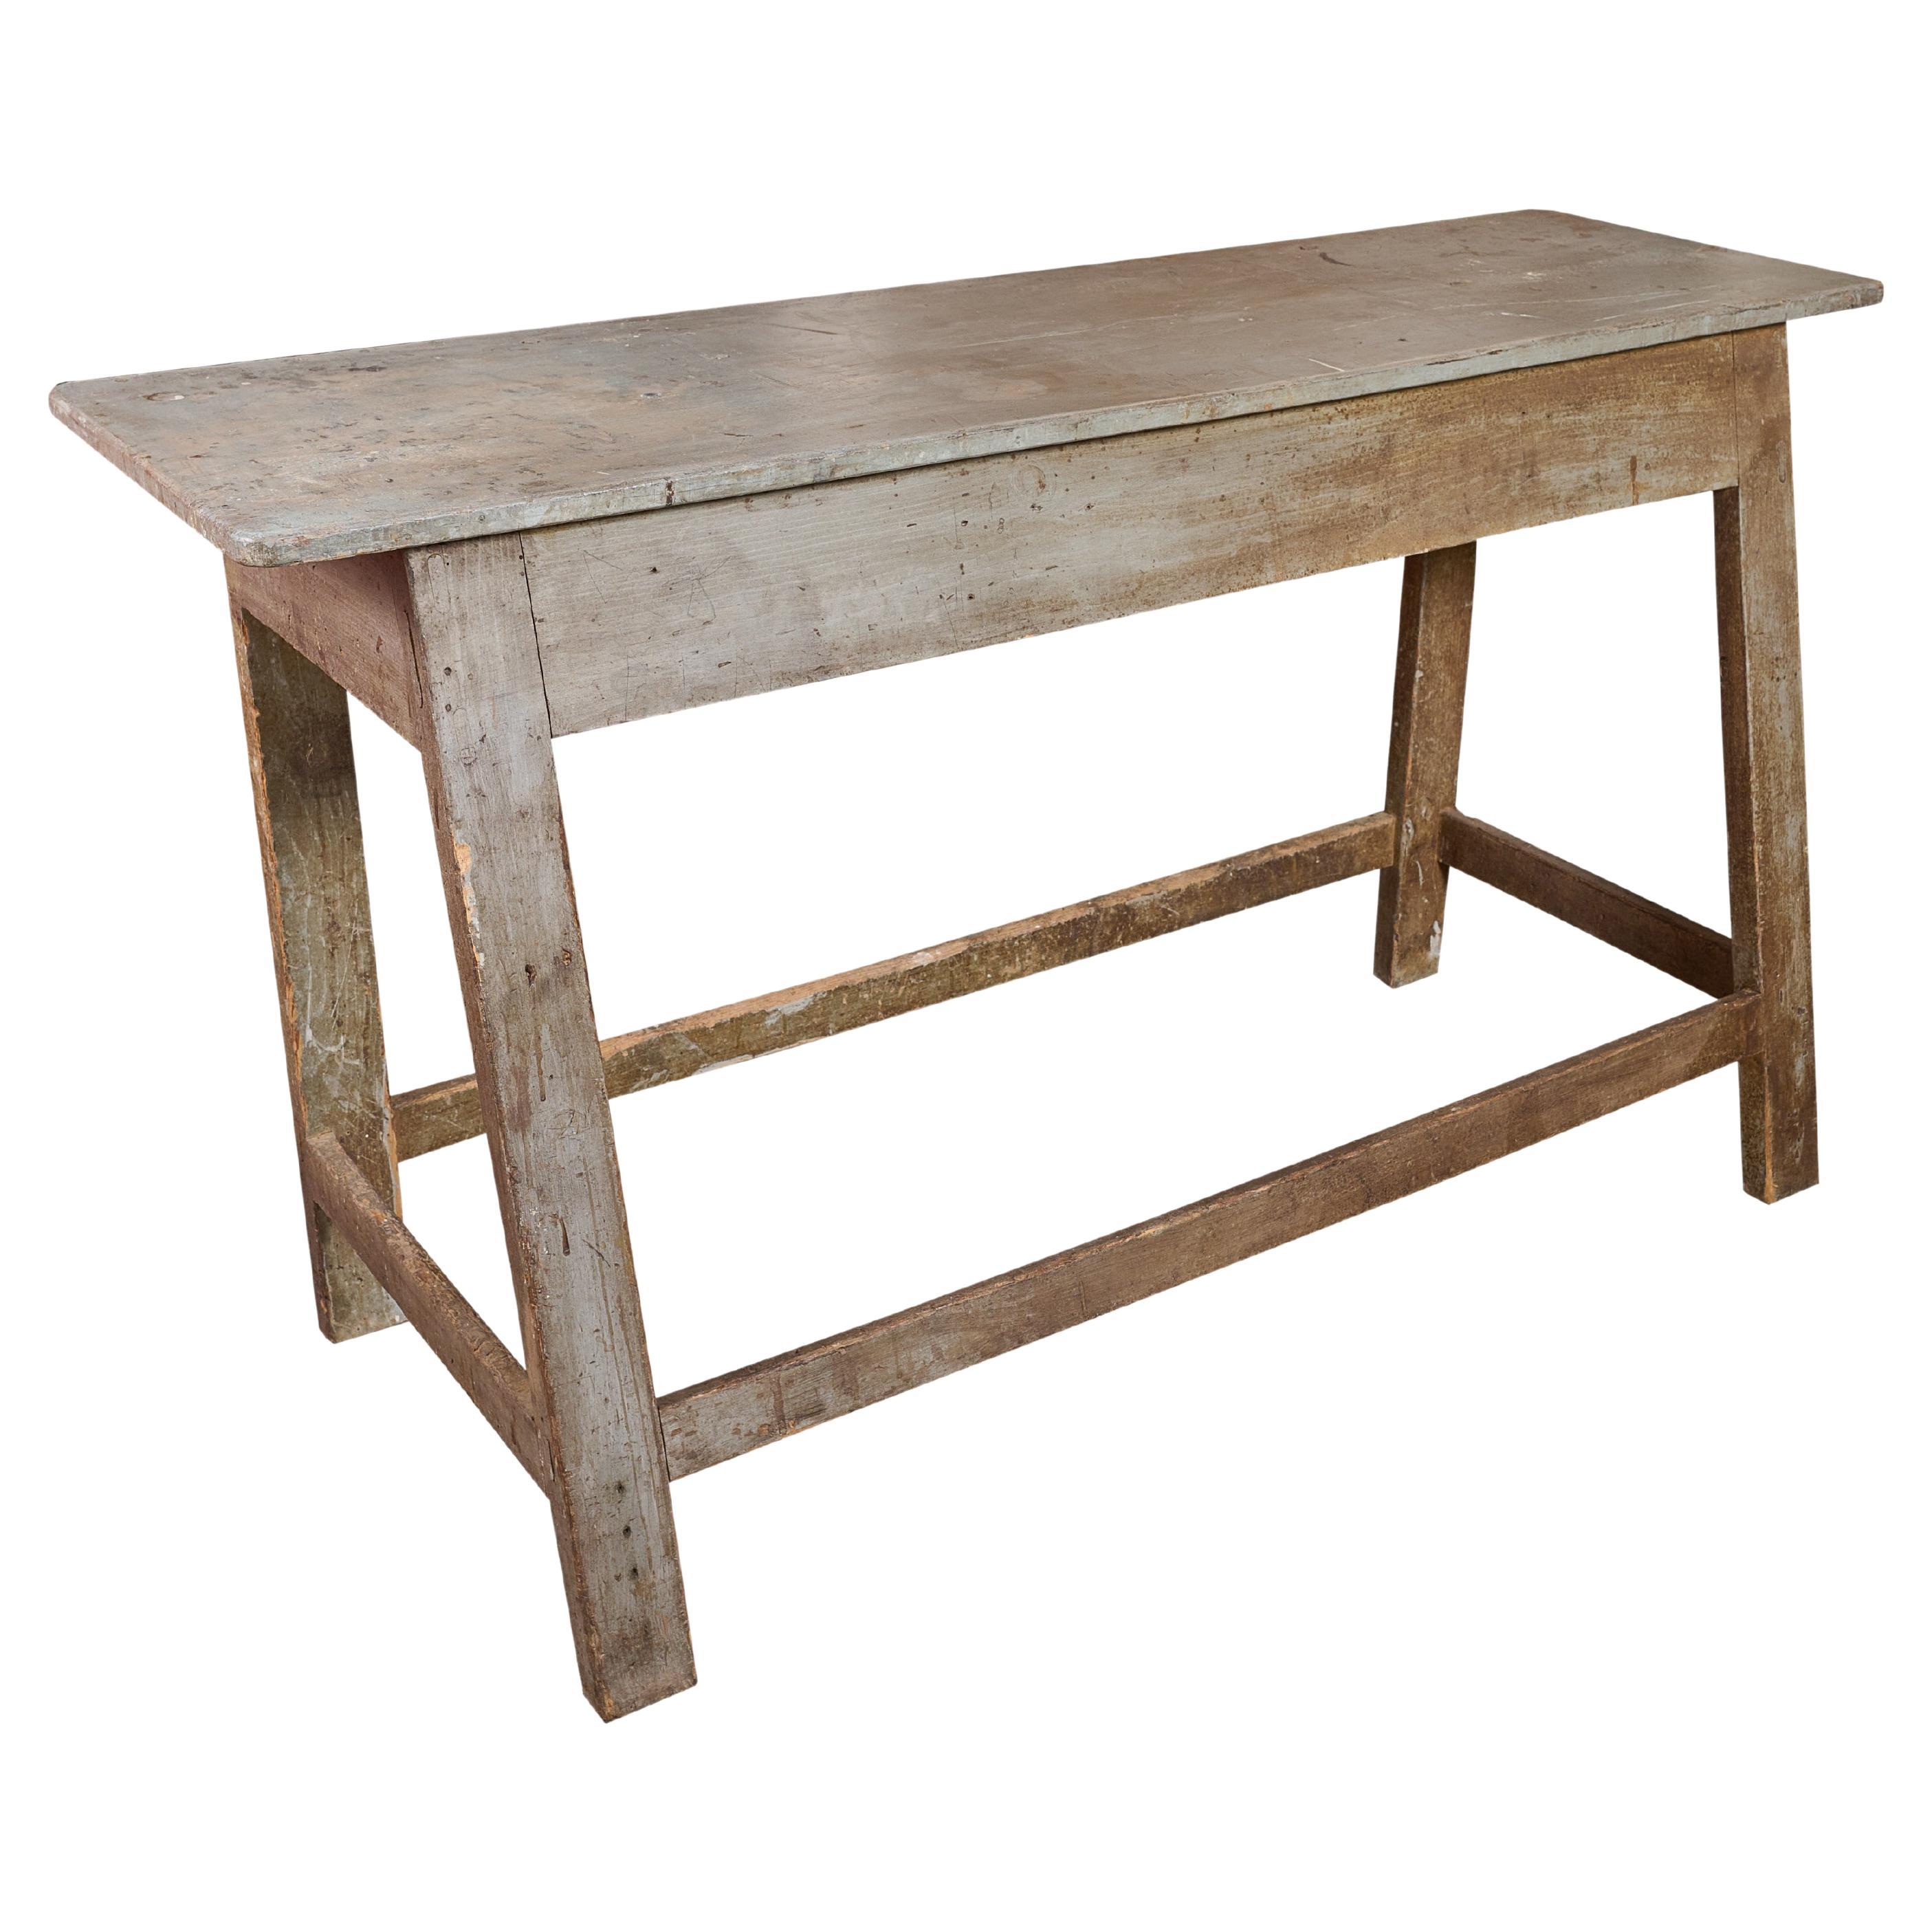 Console table with simple yet great design. Notice angled front feet. The best patina.